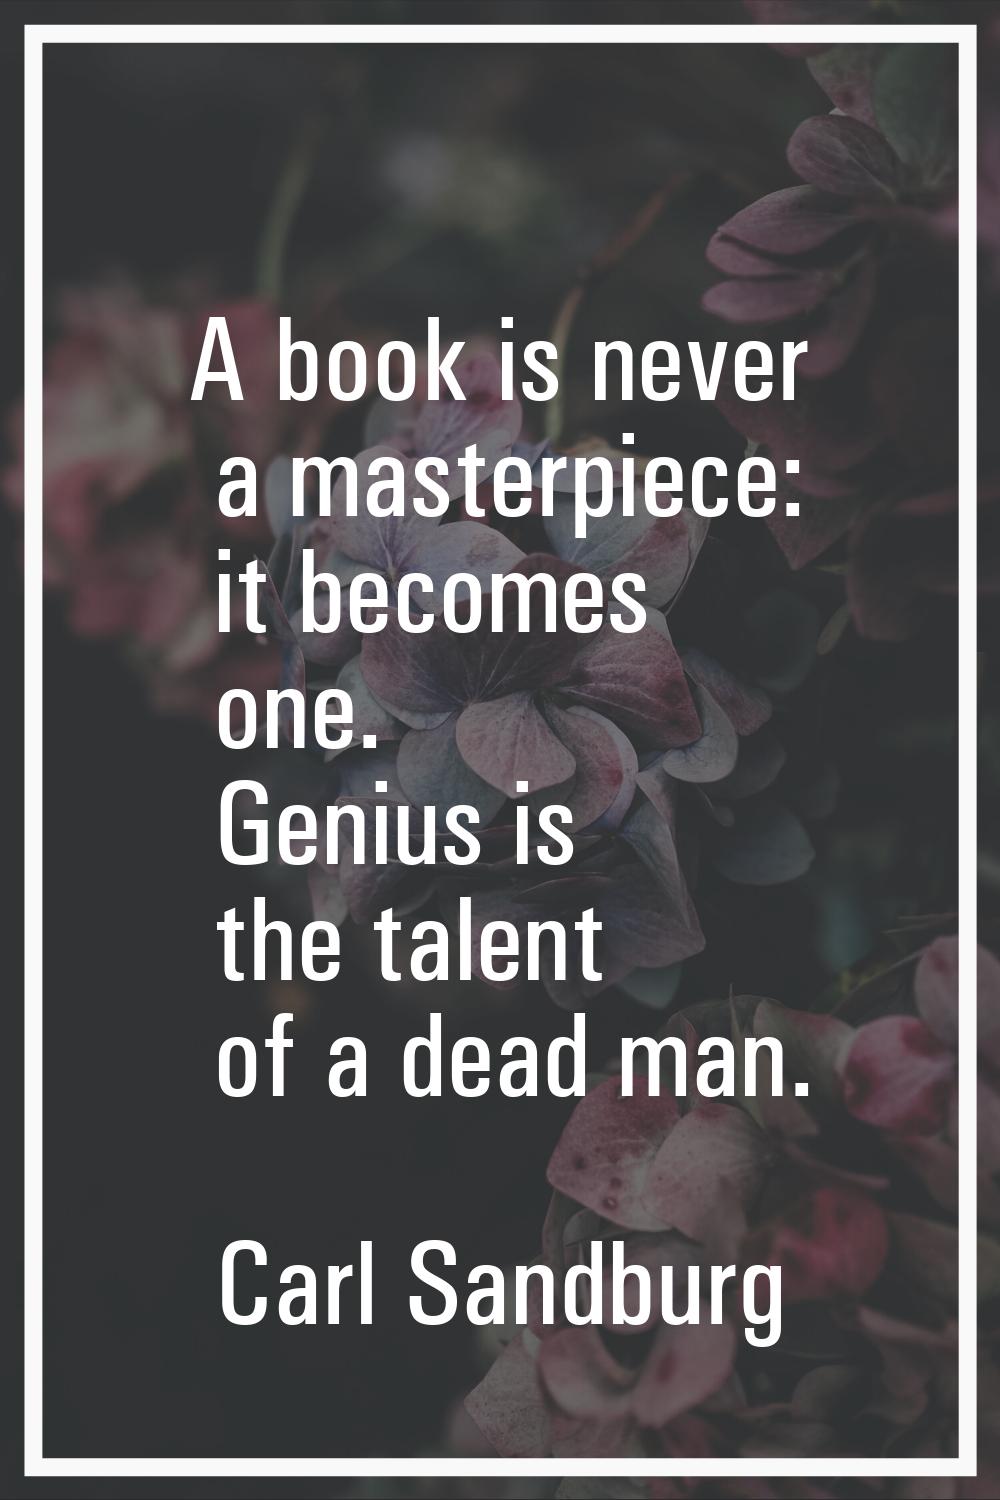 A book is never a masterpiece: it becomes one. Genius is the talent of a dead man.